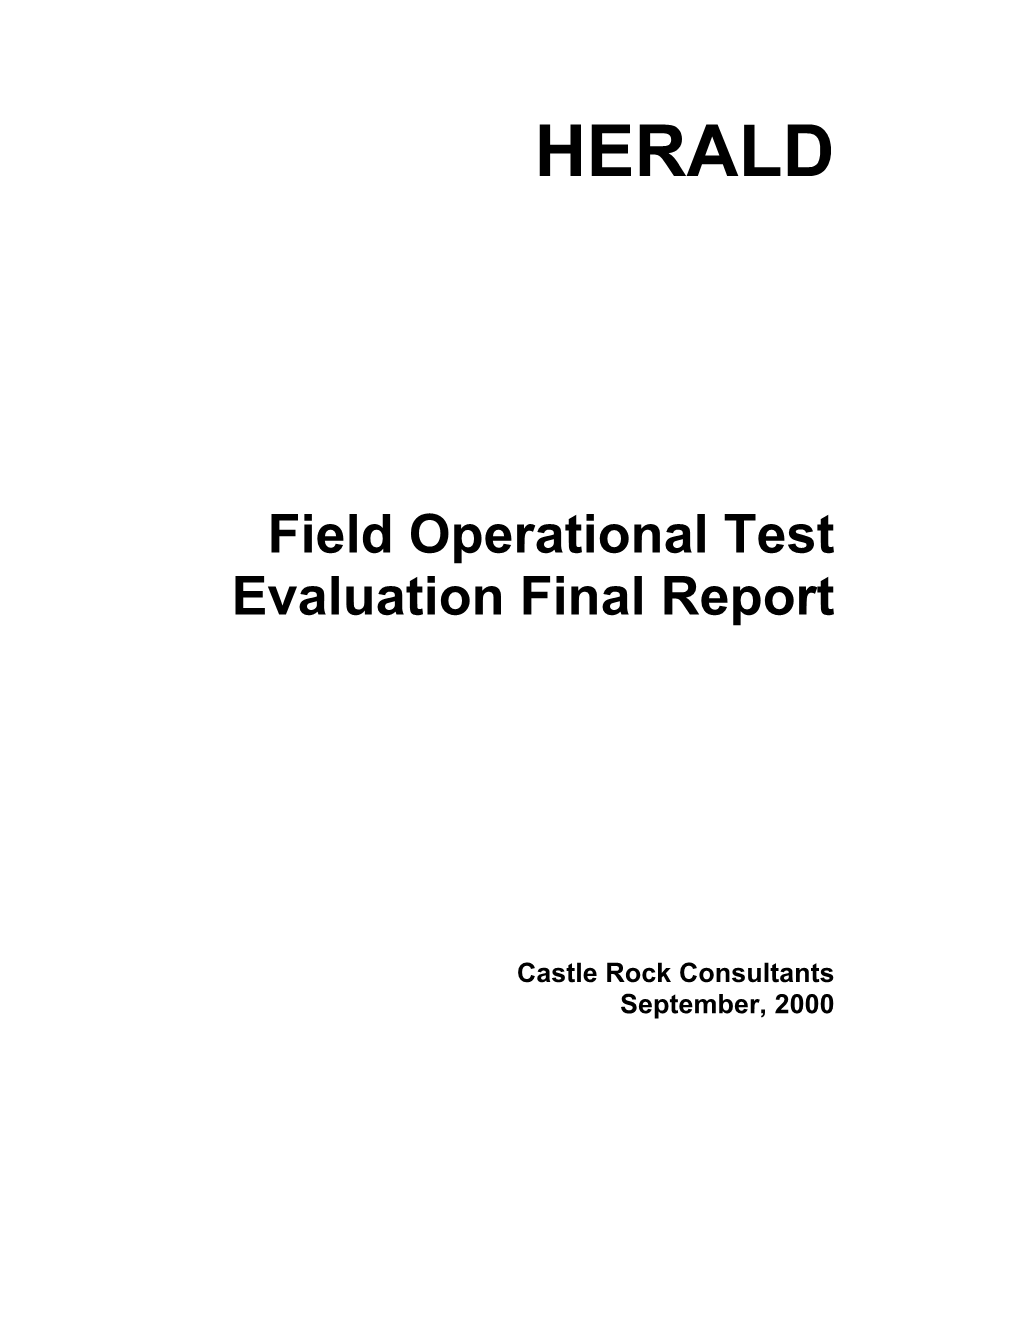 HERALD Field Operational Test Evaluation Final Report